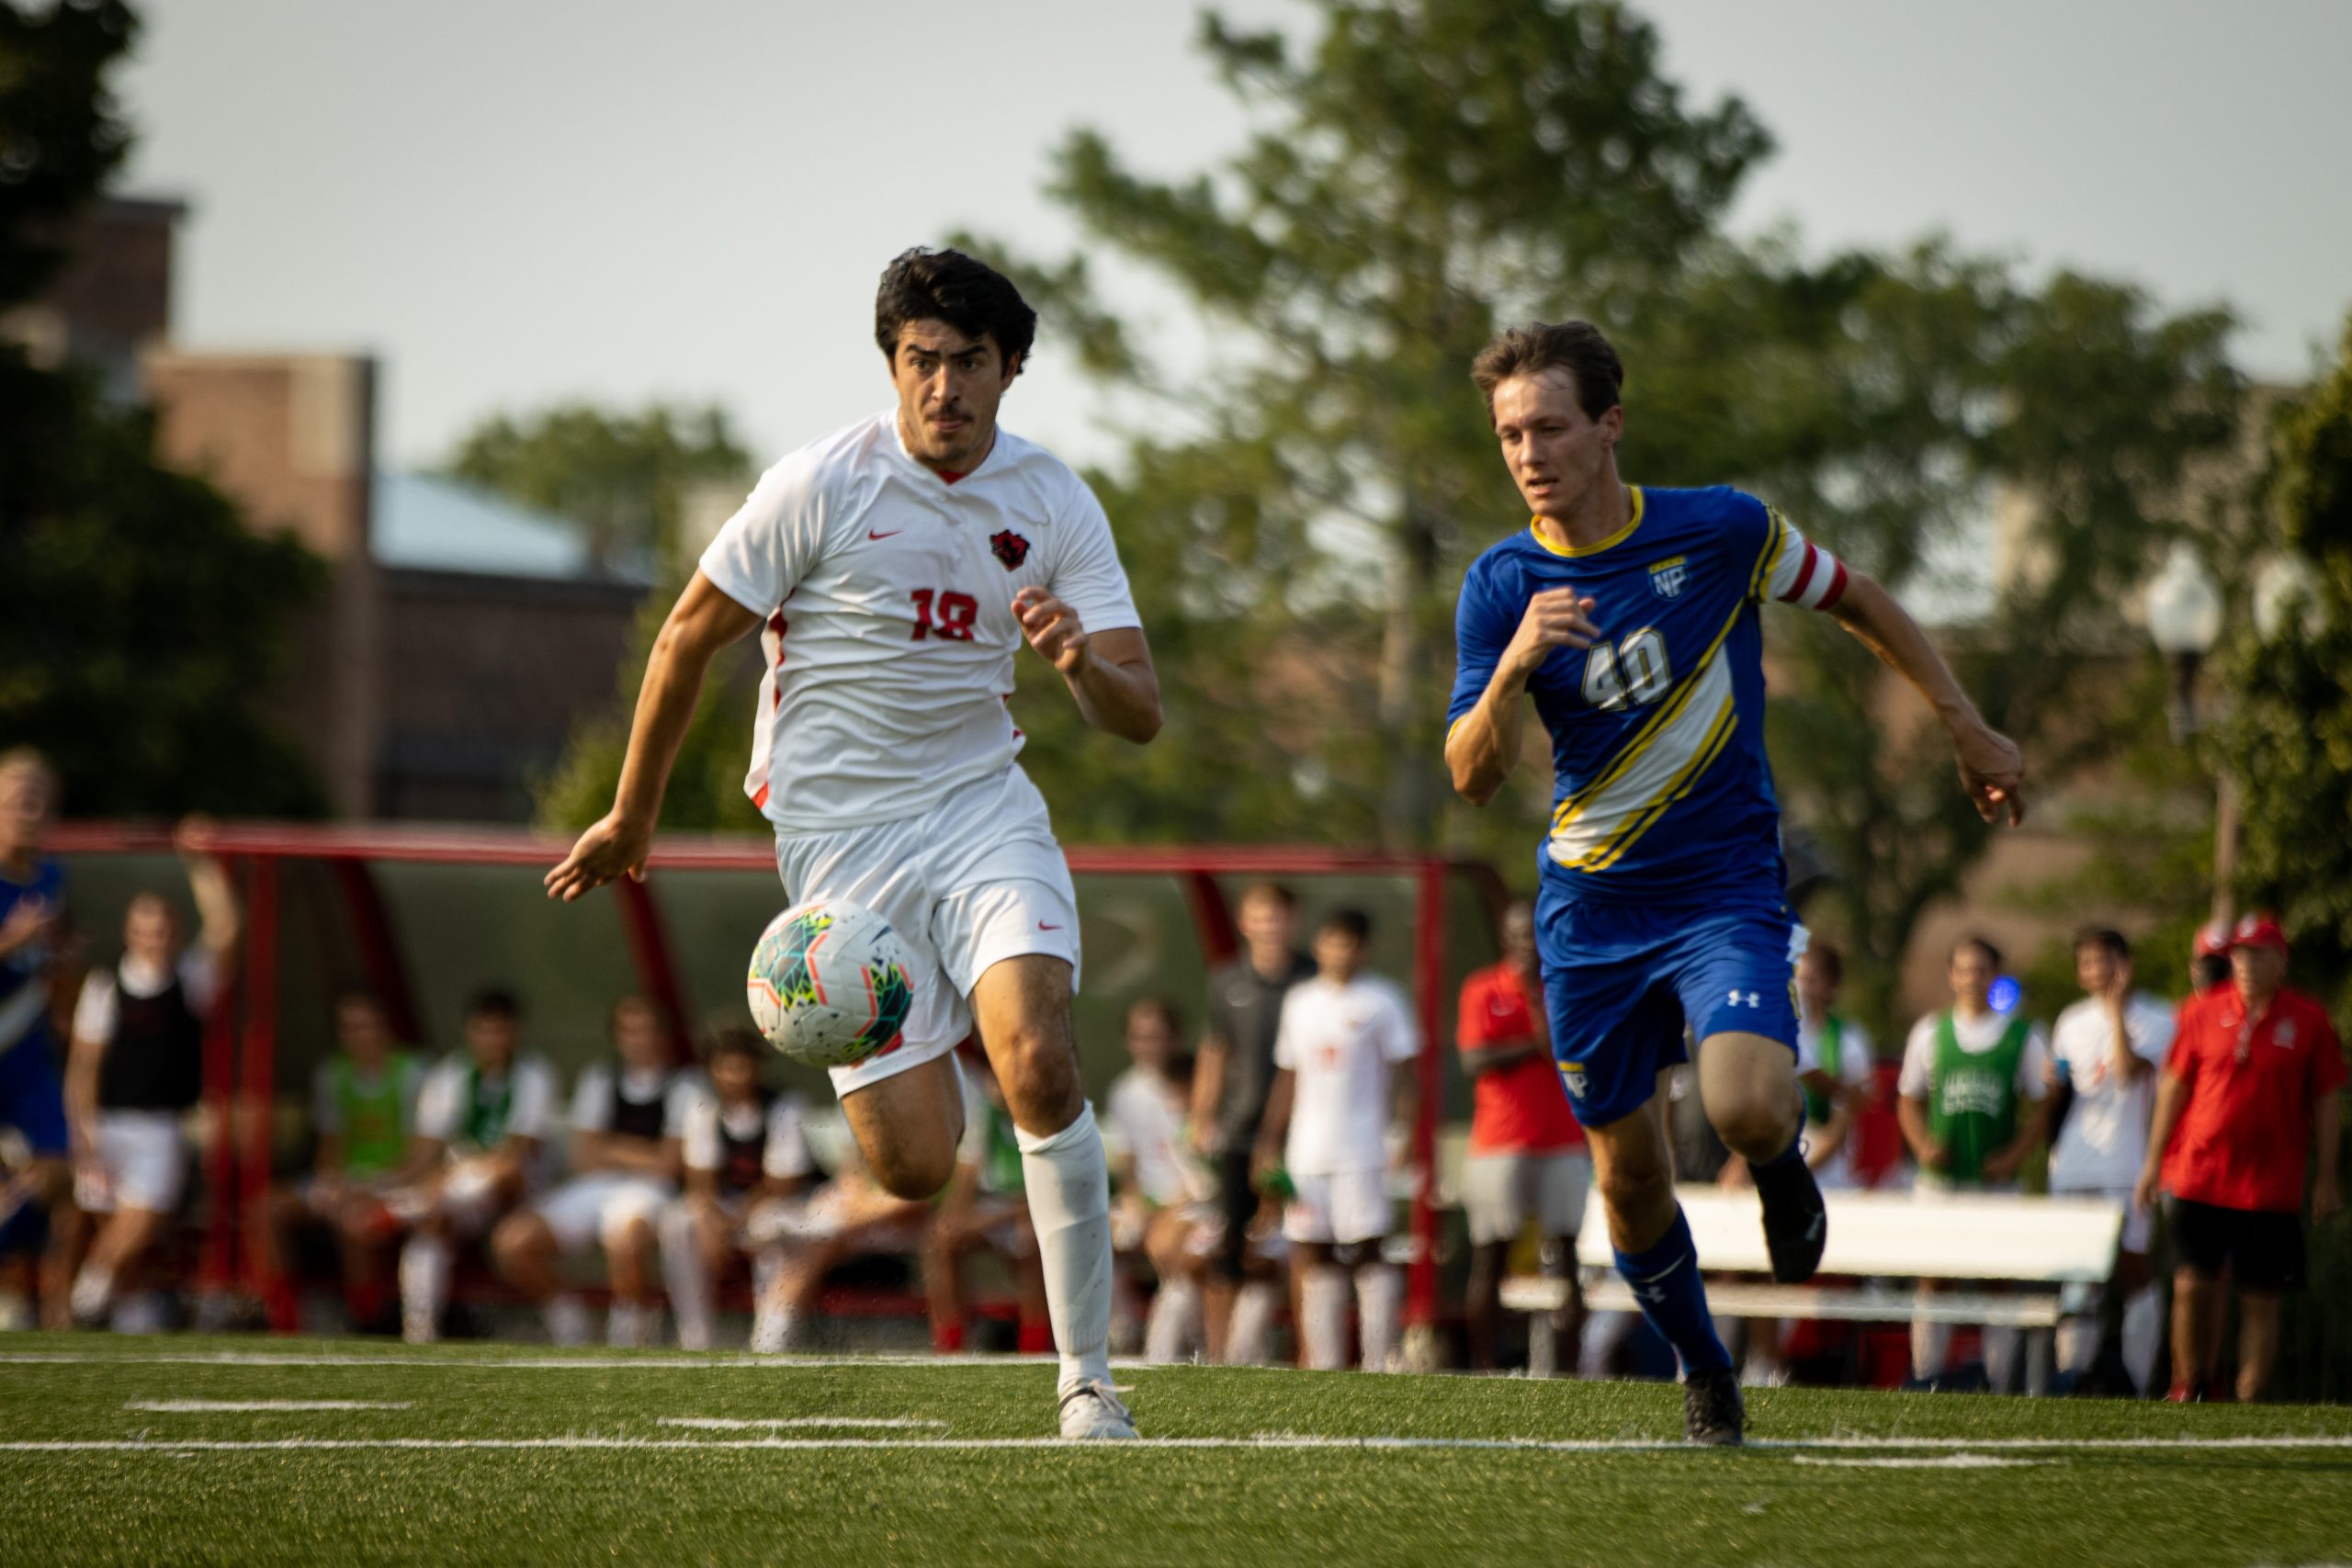 A soccer player wearing a white jersey with a red number 18 chases after a soccer ball as a player in a blue uniform with a gold stripe chases after him.